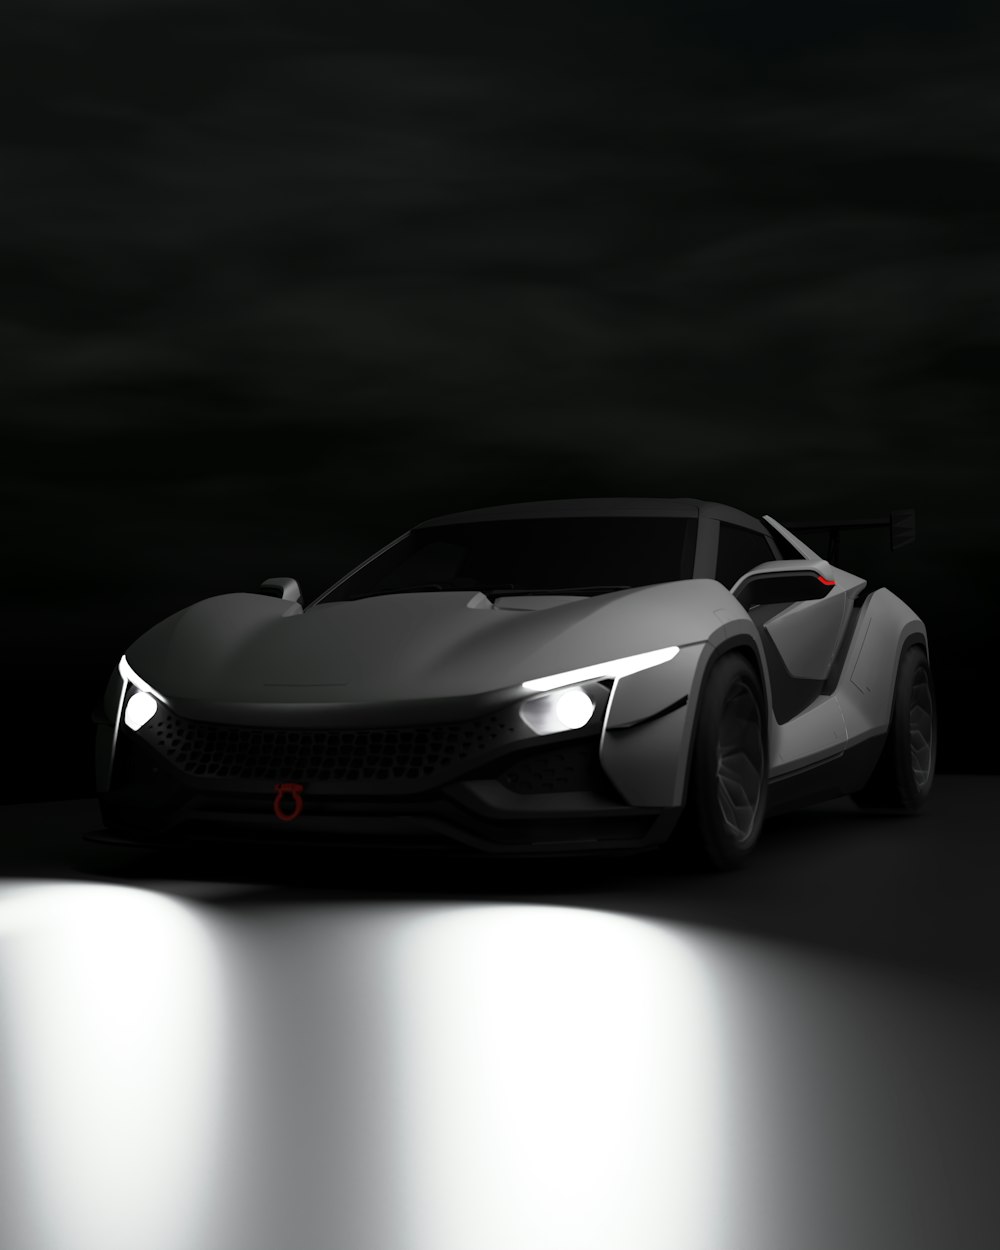 a car is shown in a dark room